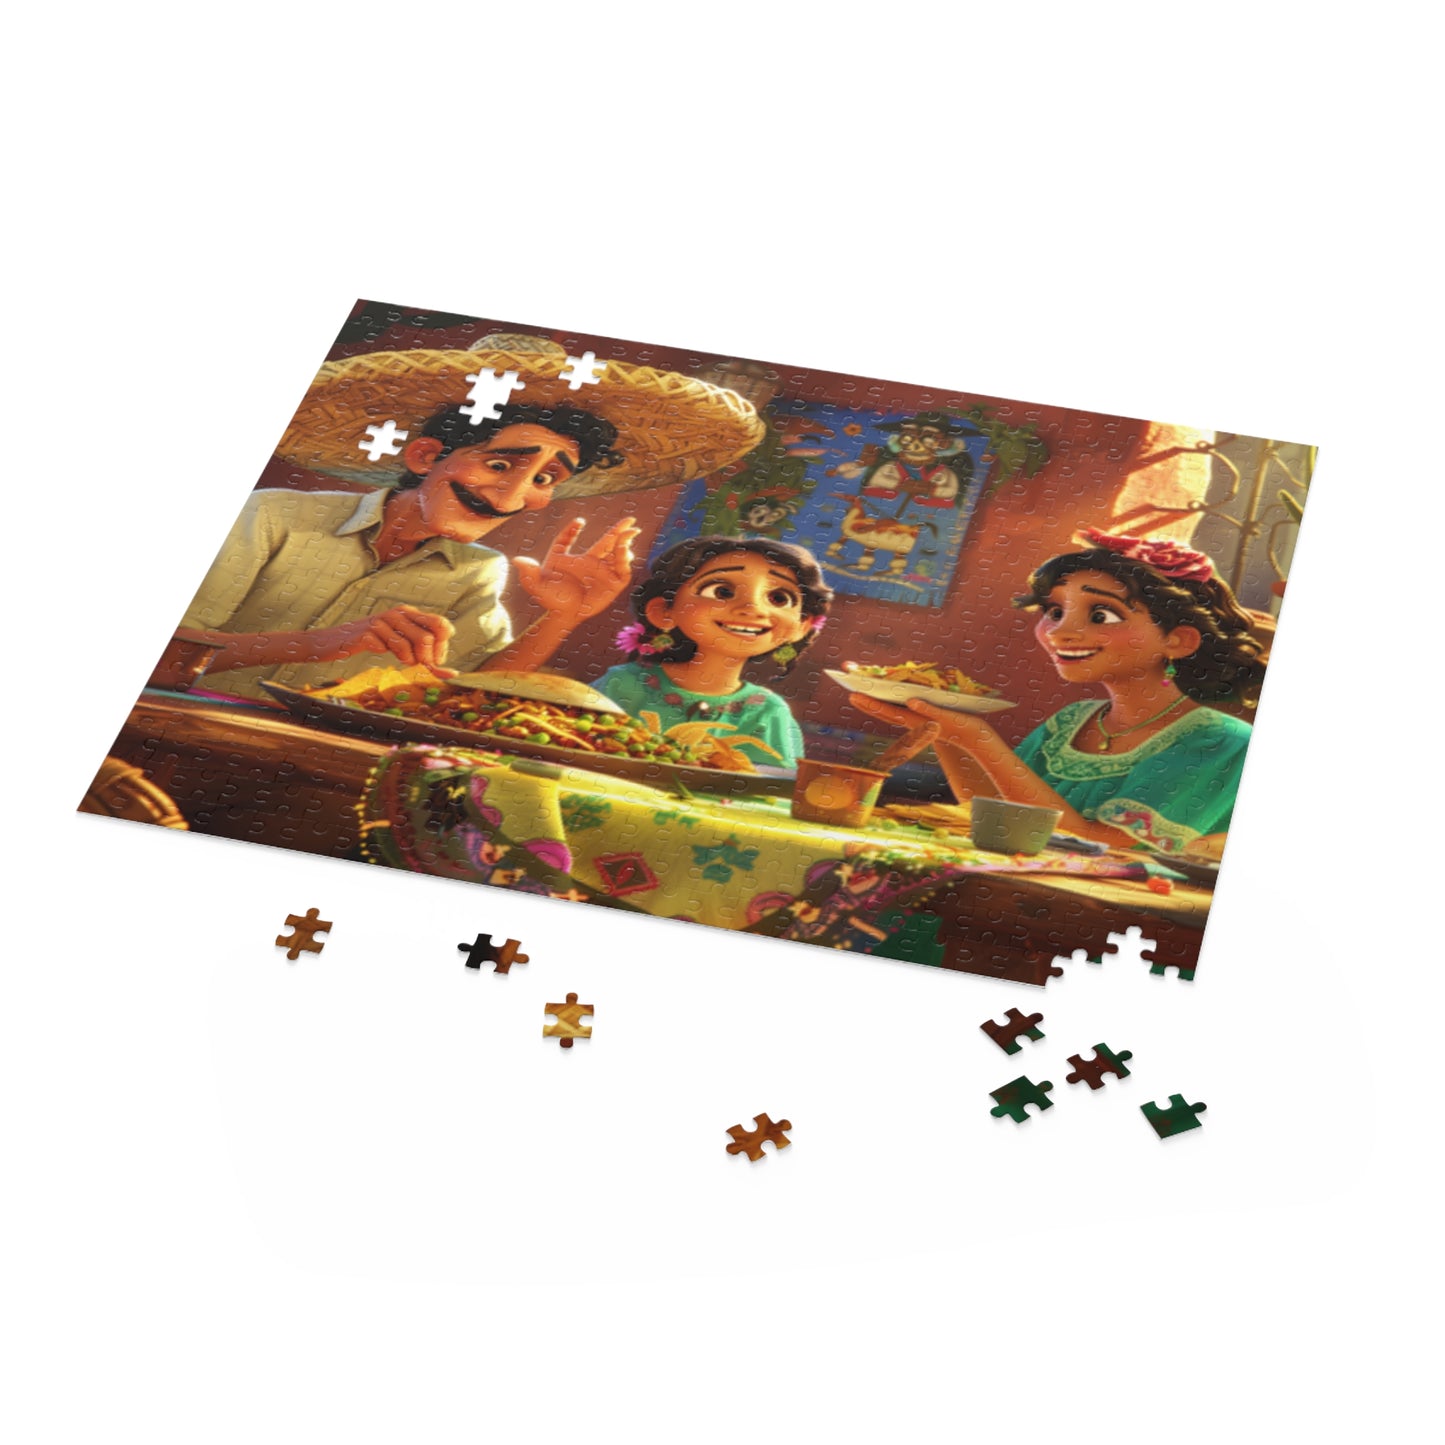 Mexican Happy Family Sitting Retro Art Jigsaw Puzzle Adult Birthday Business Jigsaw Puzzle Gift for Him Funny Humorous Indoor Outdoor Game Gift For Her Online-5